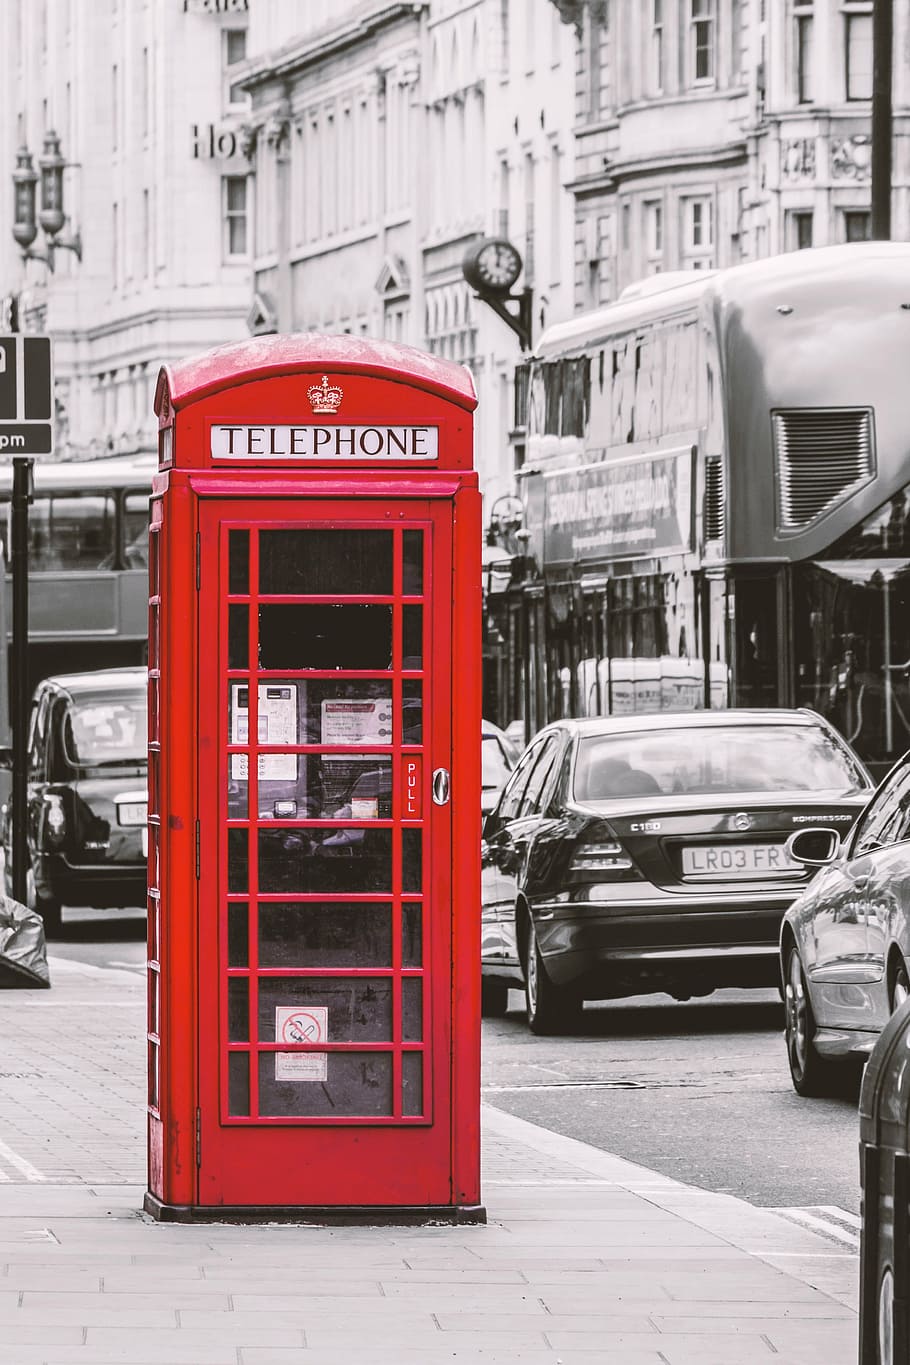 selective, color, red, telephone booth, london, phone booth, england, red telephone box, british, dispensary